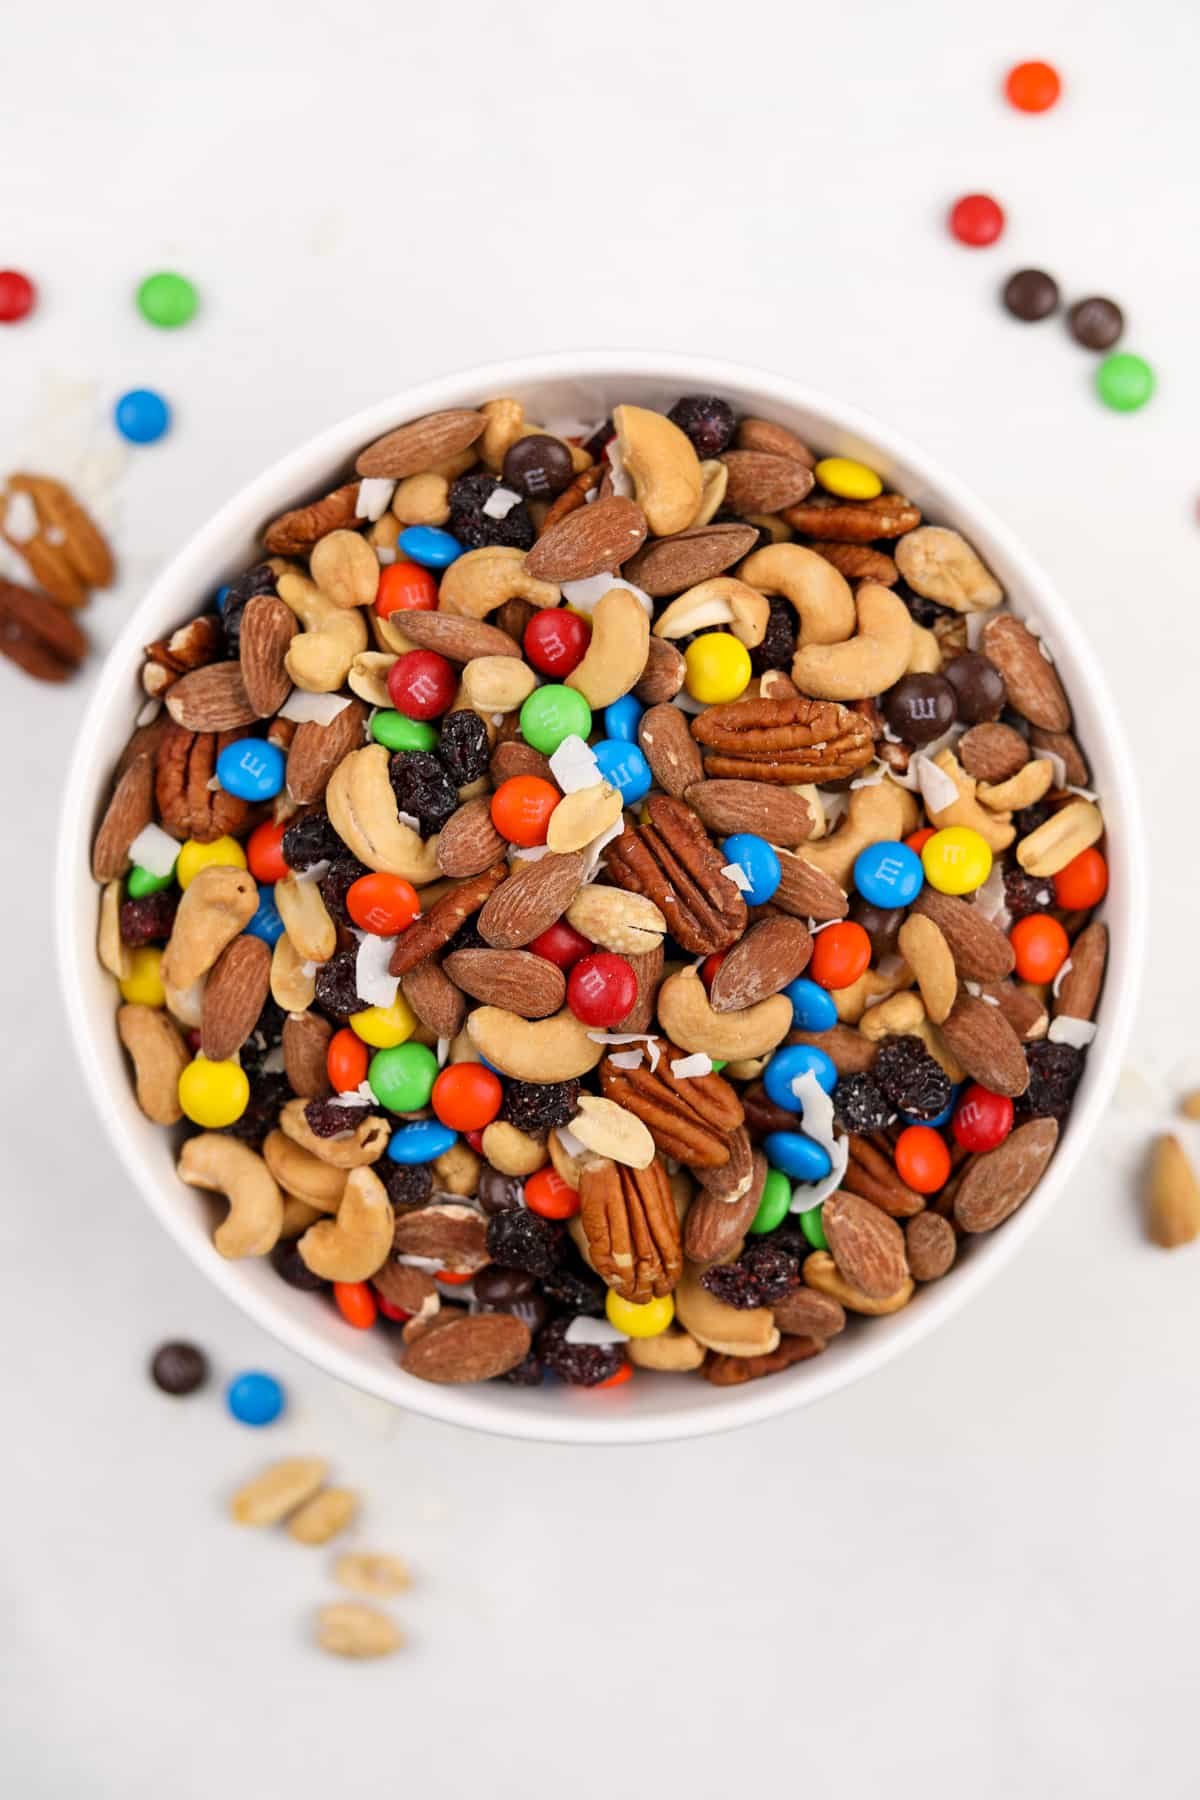 A large bowl of trail mix on a white surface.